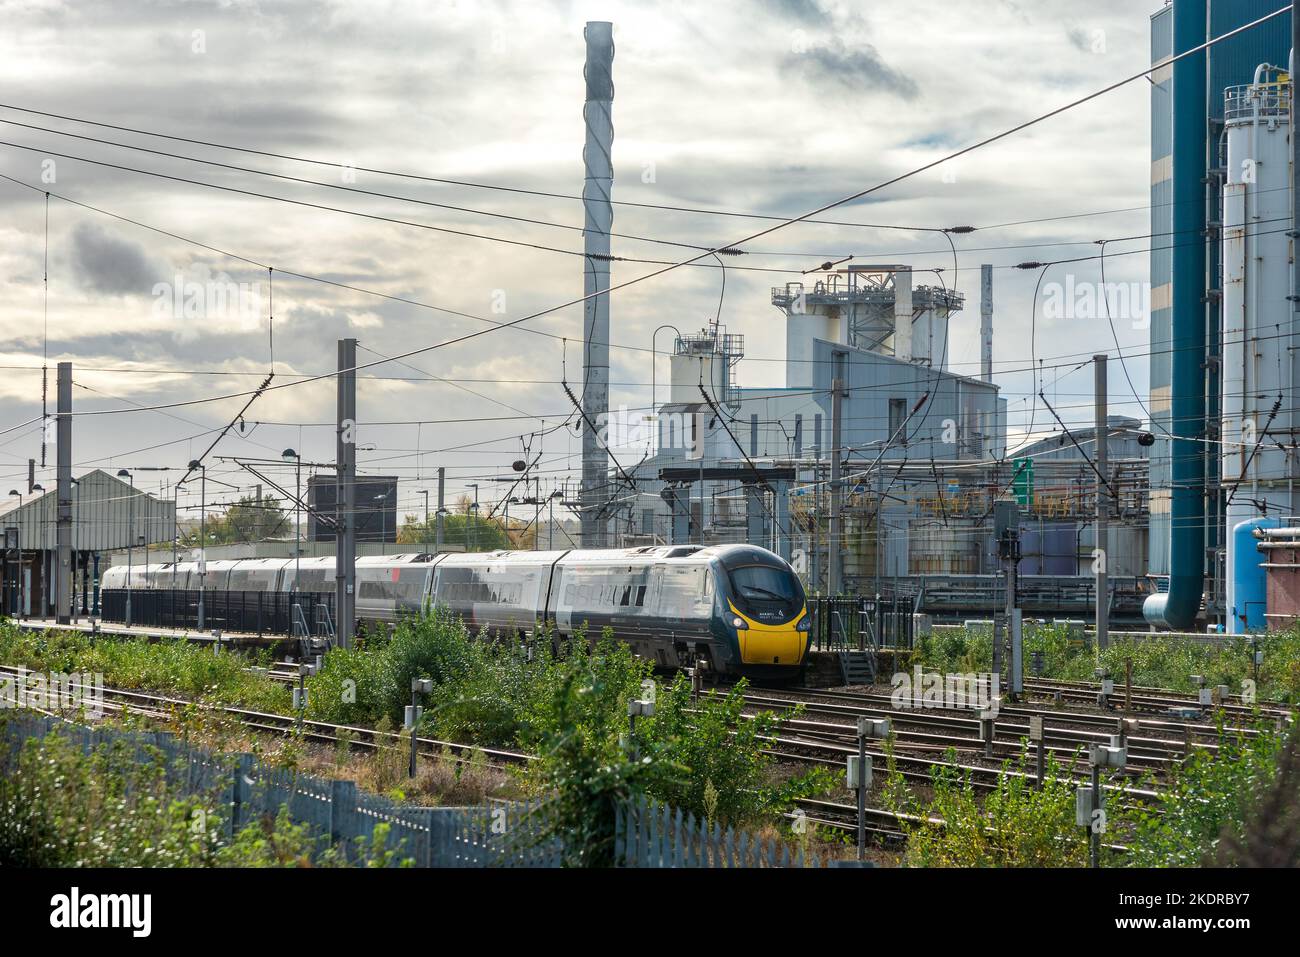 Avanti Pendolino train at Warrington Bank Quay station in front of the closed Lever Faberge factory. Stock Photo